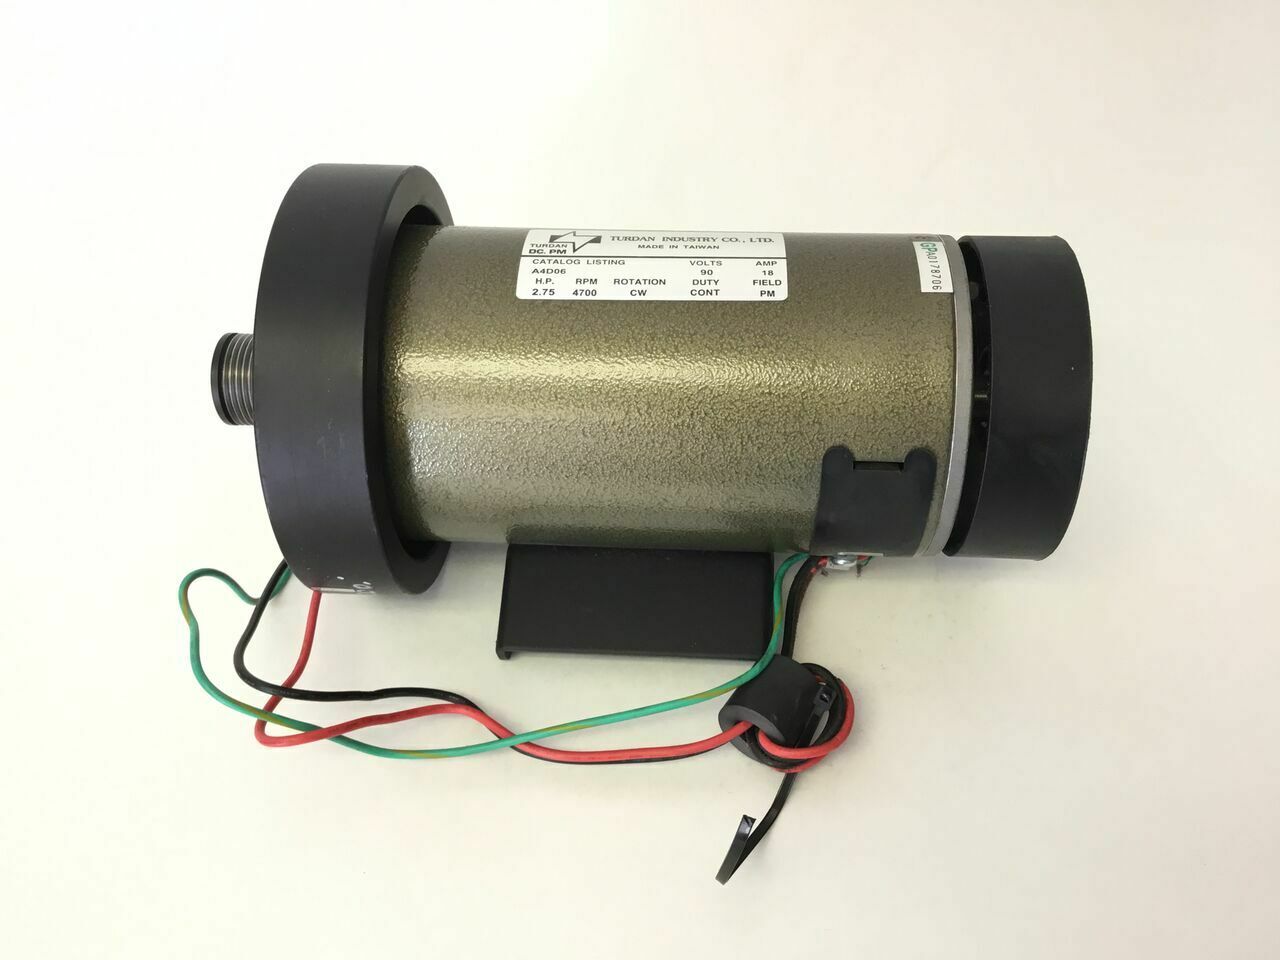 Lifespan TR3000i Treadmill DC Drive Motor with Flywheel A4D06 (Used)